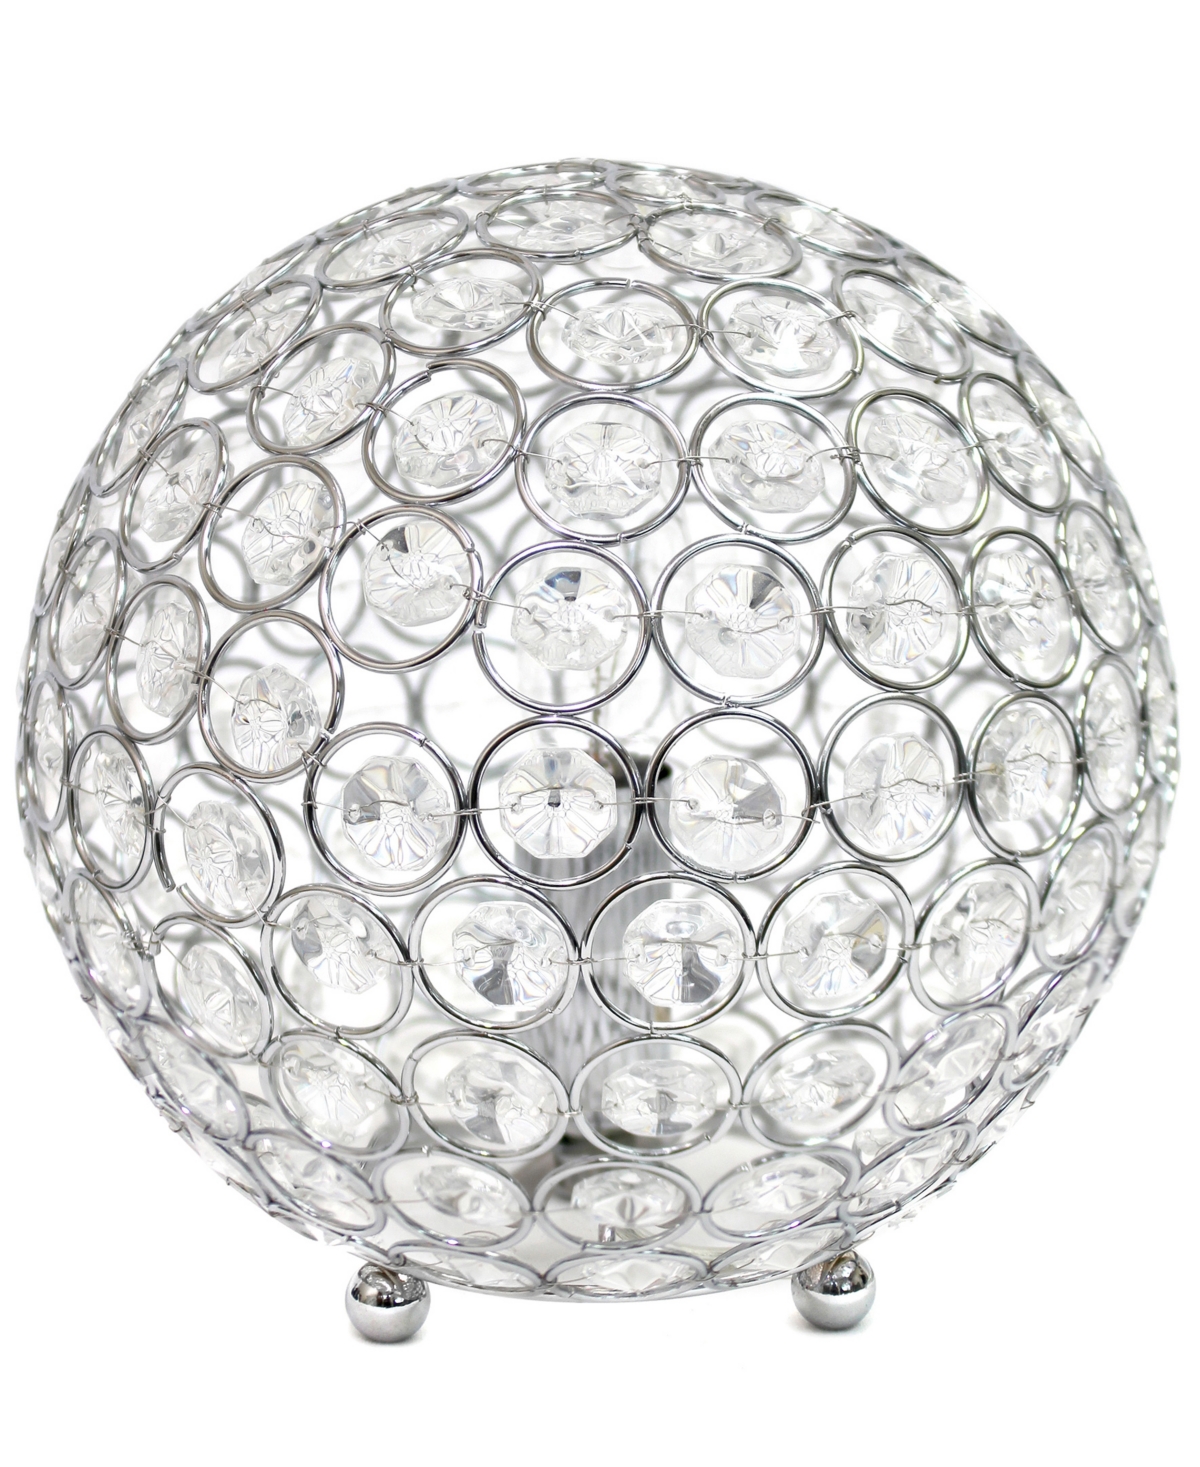 All The Rages Lalia Home Elipse 8" Metal Crystal Orb Table Lamp In Chrome